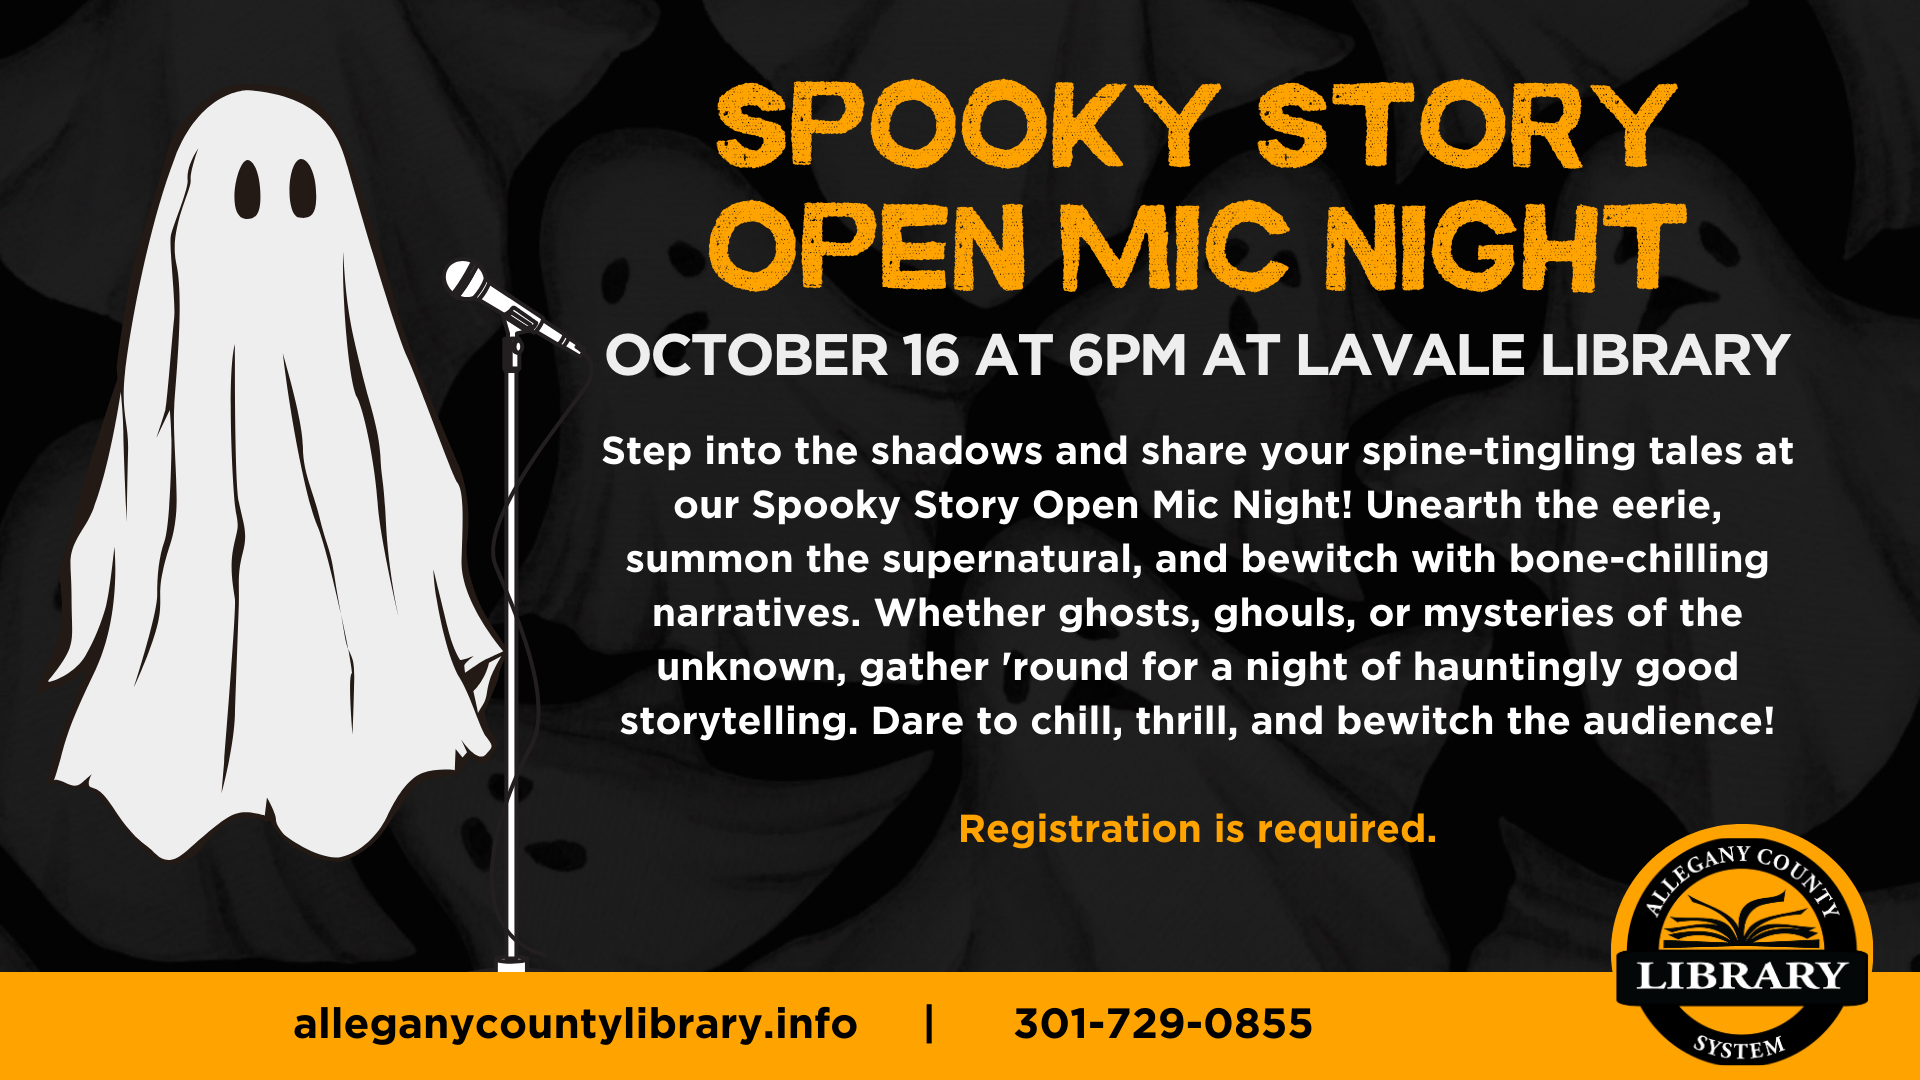 Spooky Story Open Mic Night event details